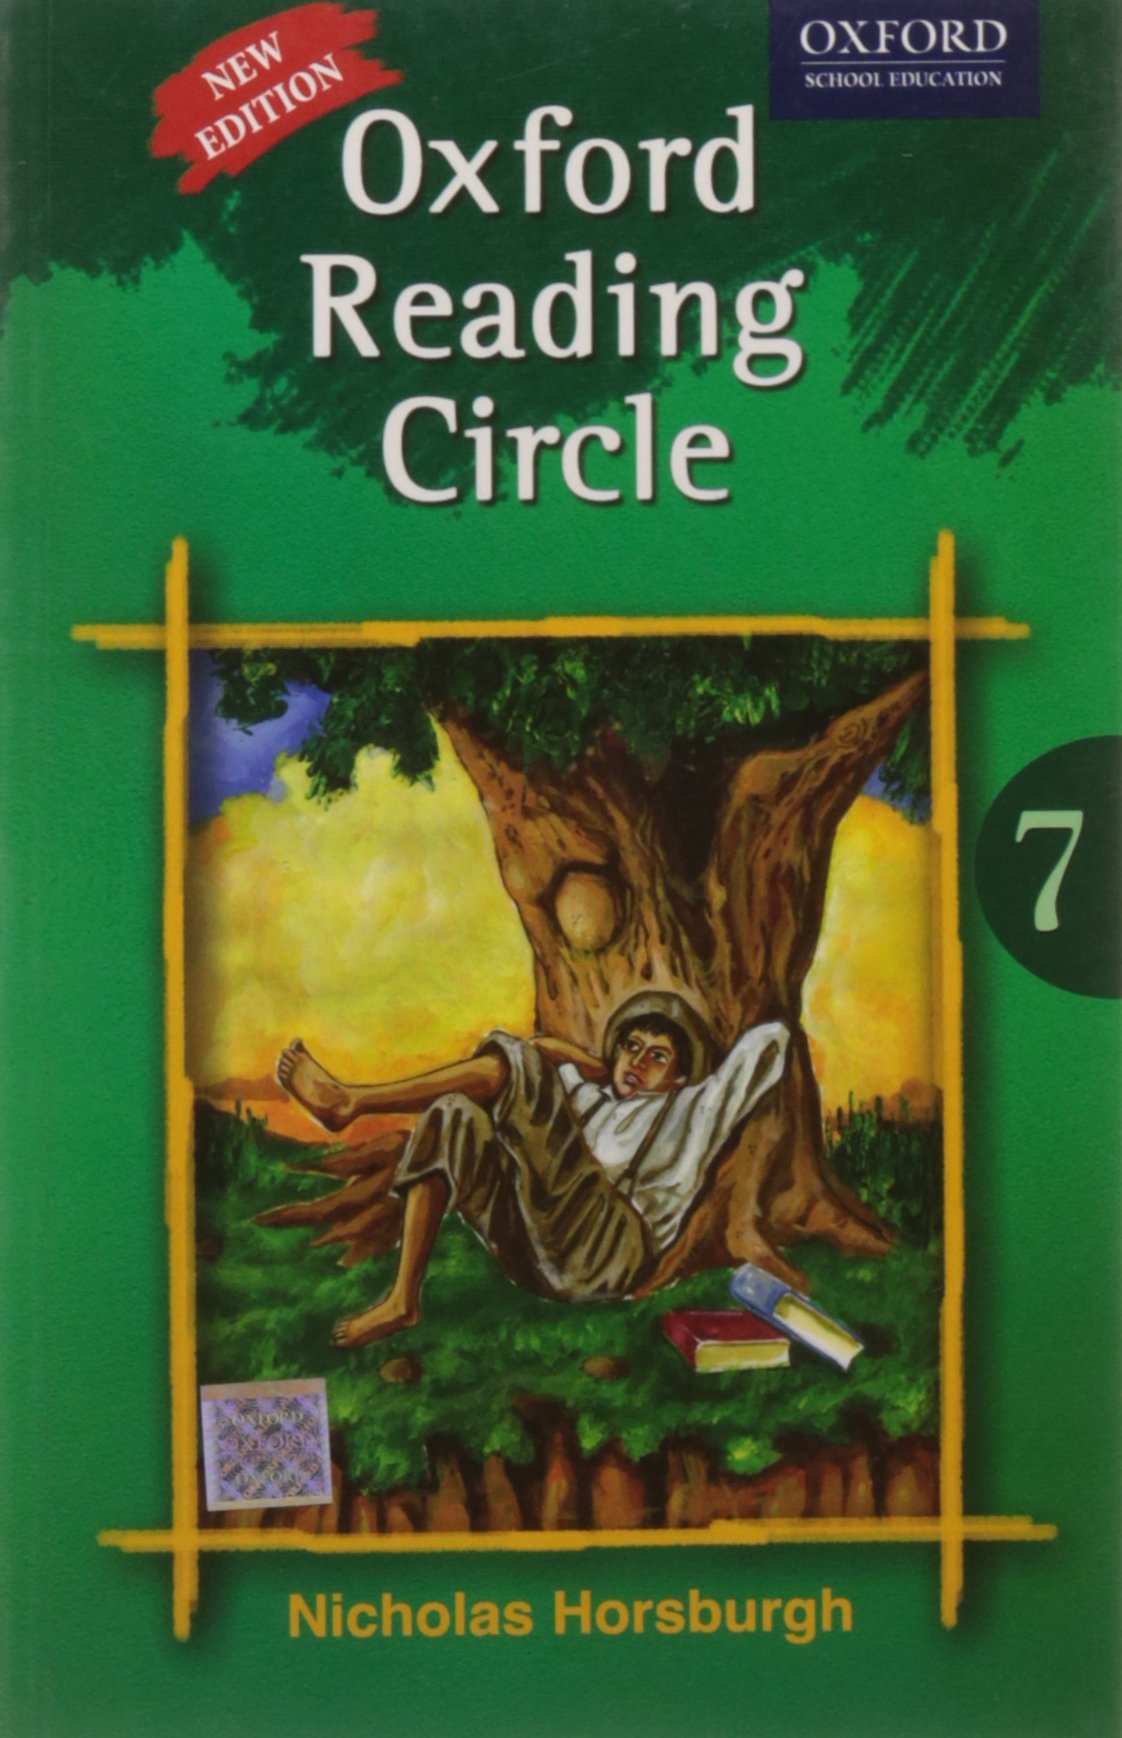 Oxford Reading Circle (New Edition ) Book 7